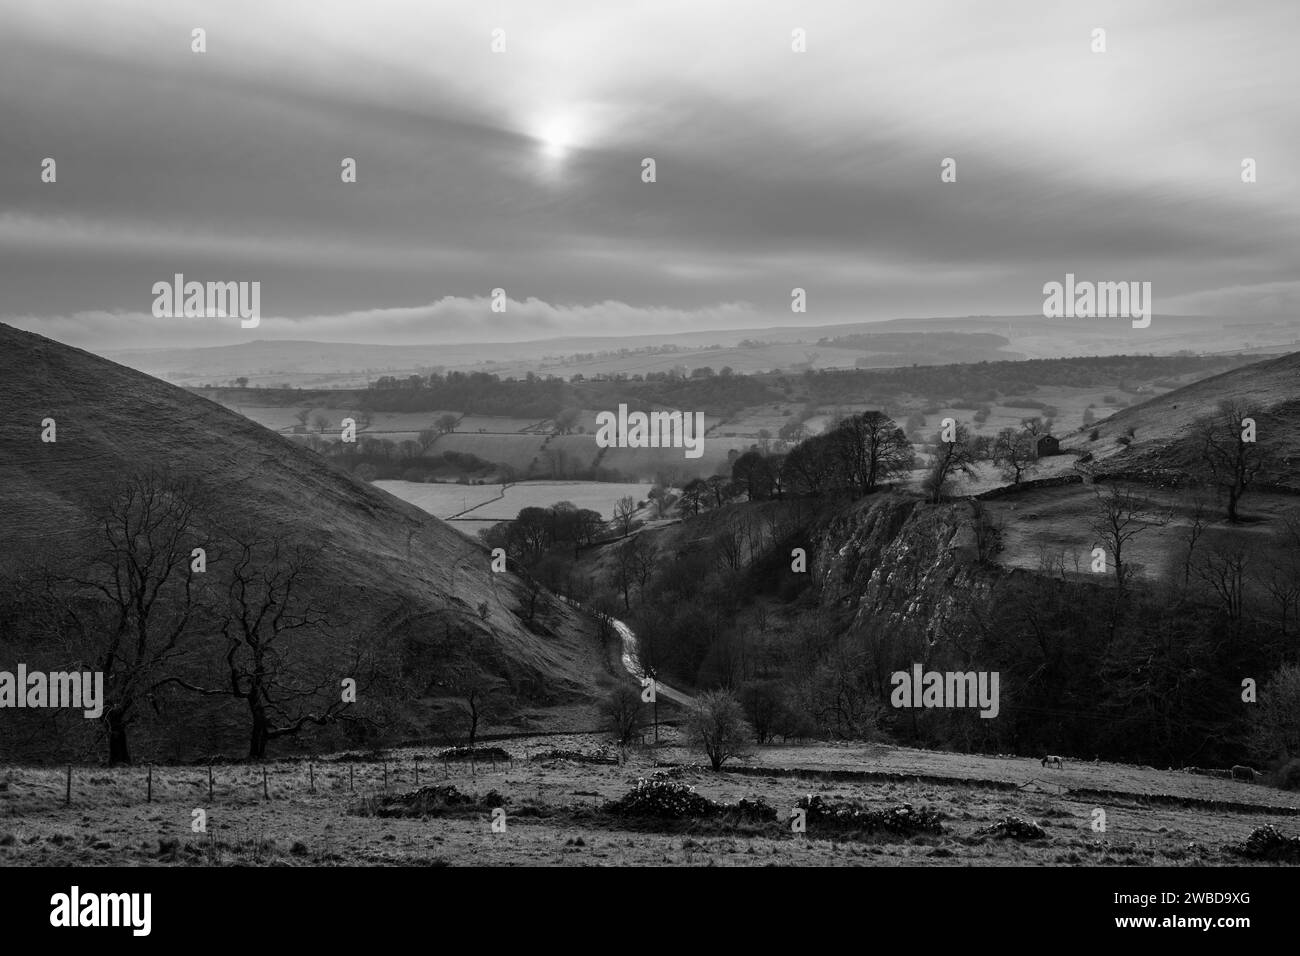 A wintry scene in the Peak District - Aldery Cliff and the Dove Valley near Earl Sterndale, Derbyshire Stock Photo